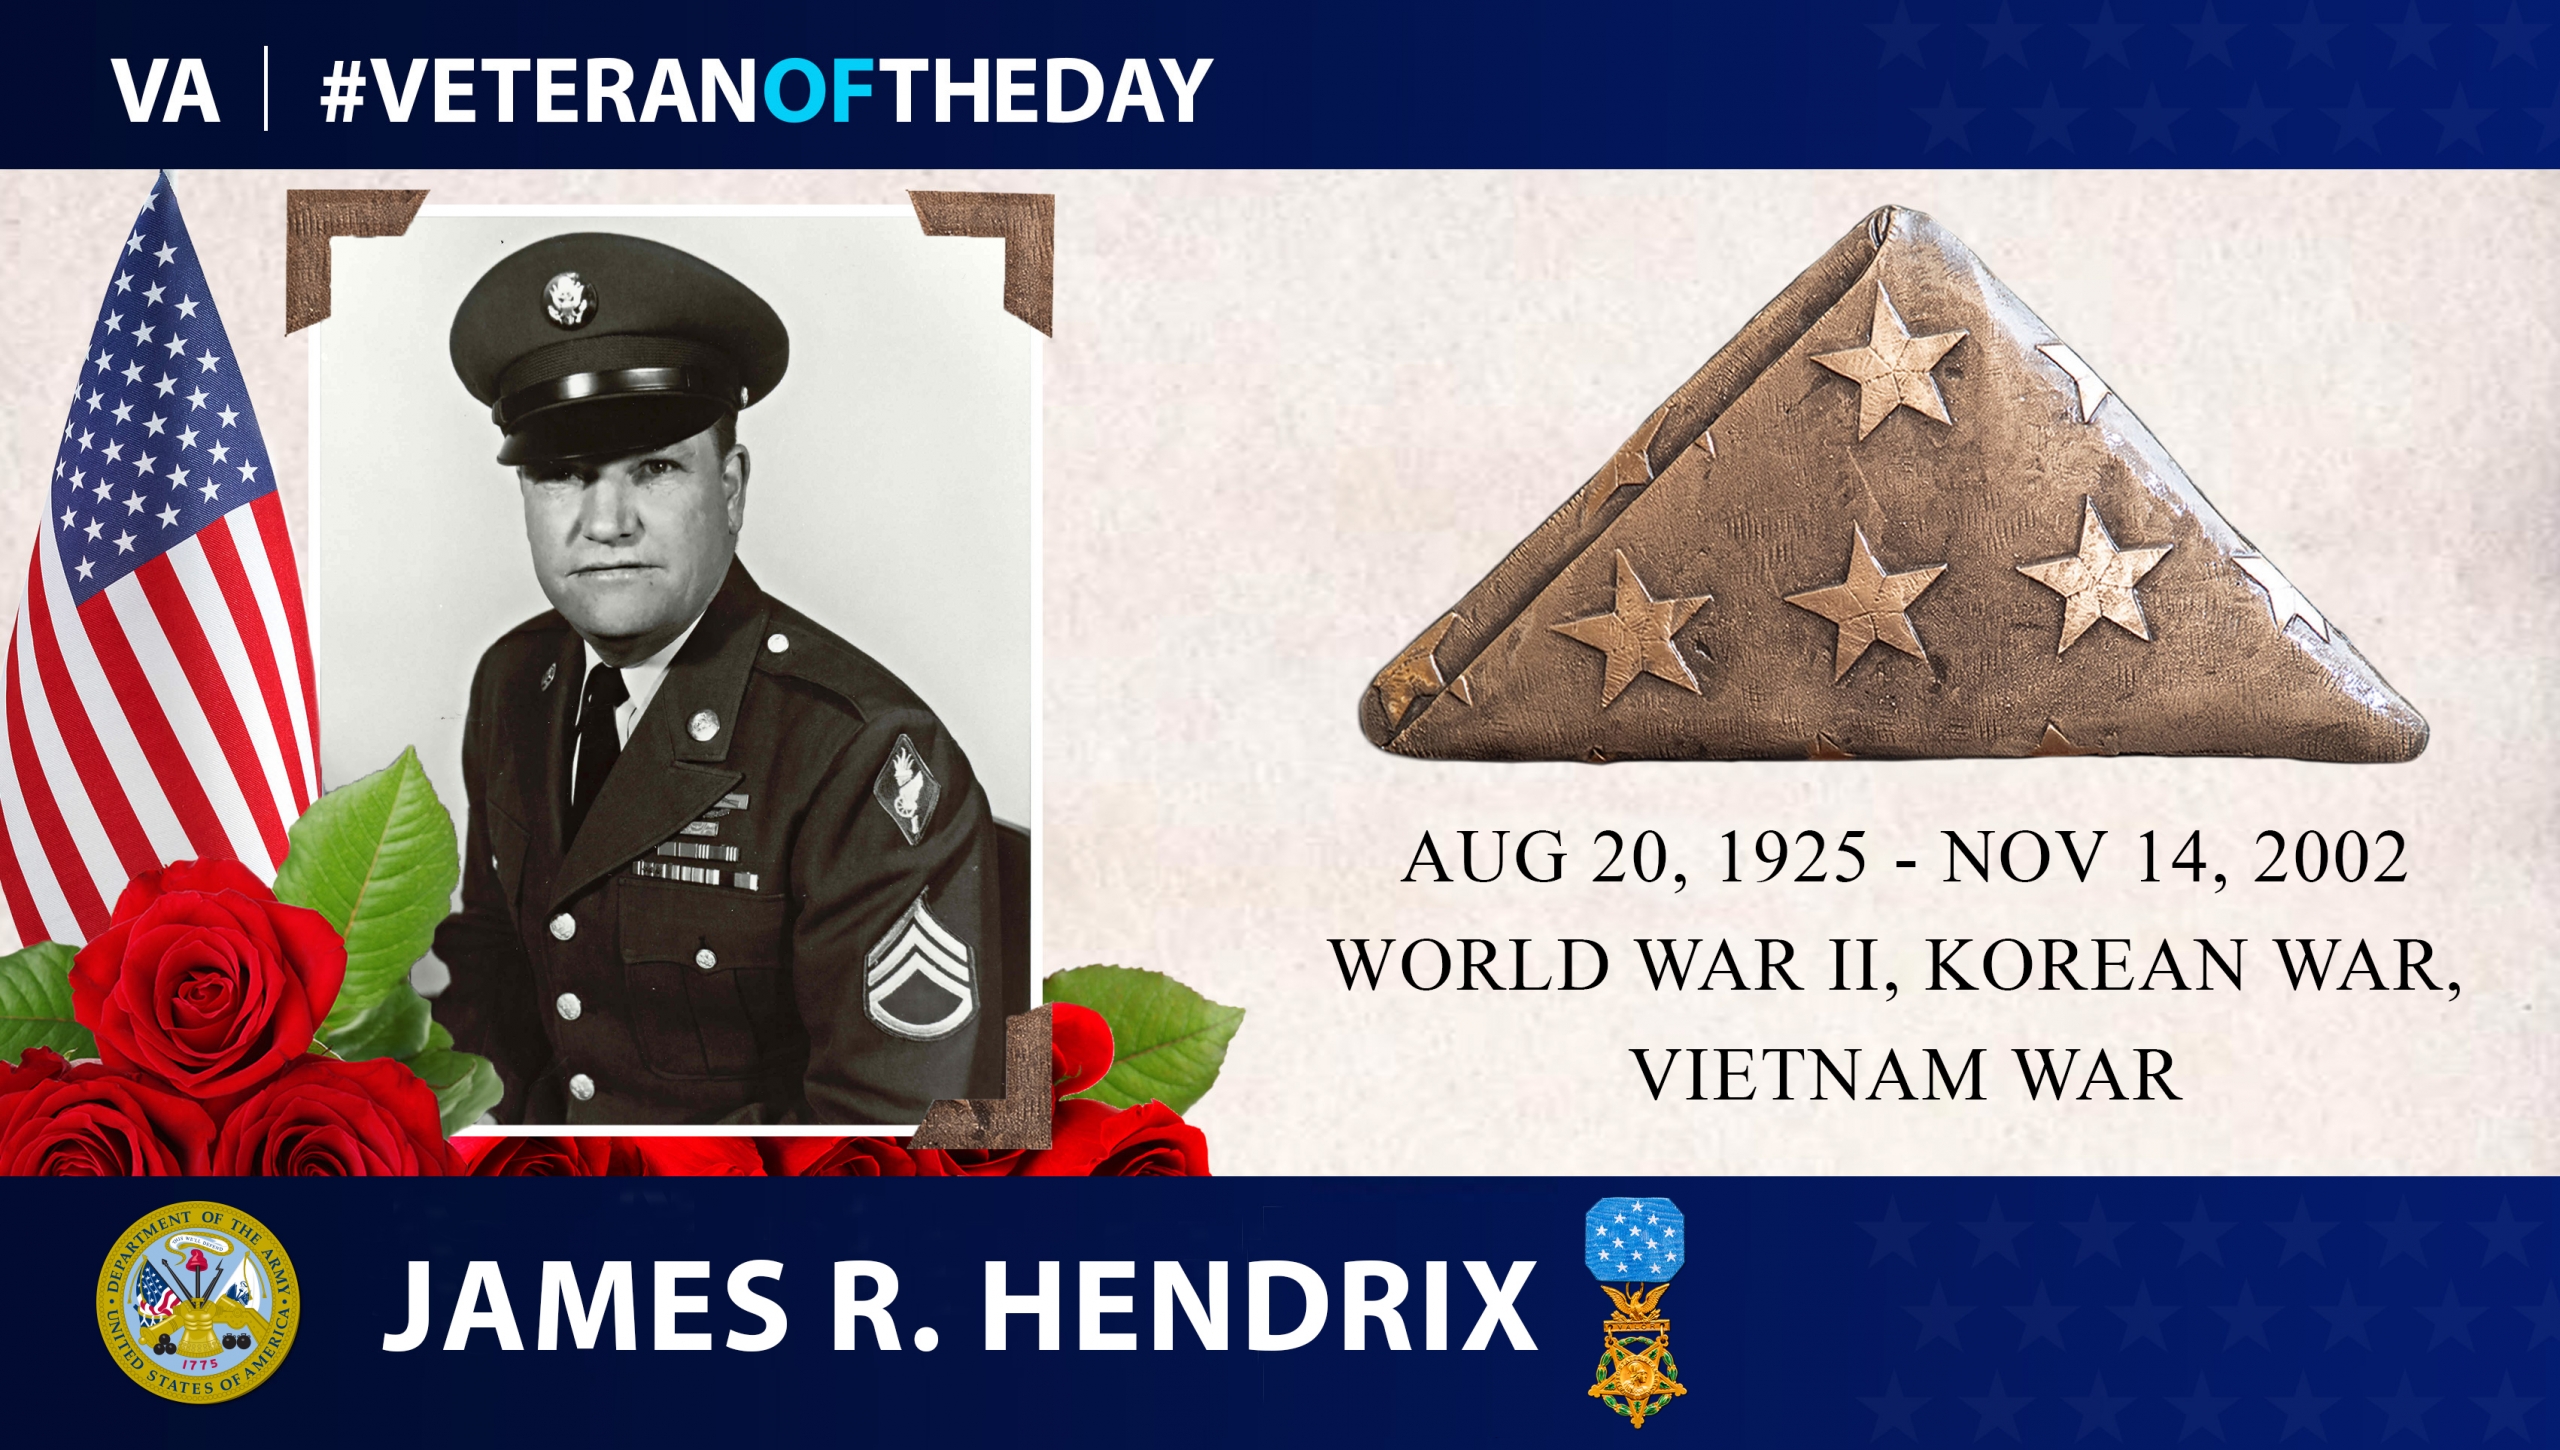 Today’s #VeteranOfTheDay is Army Veteran James Richard Hendrix. Hendrix served as an infantryman during World War II and paratrooper during the Korean War.